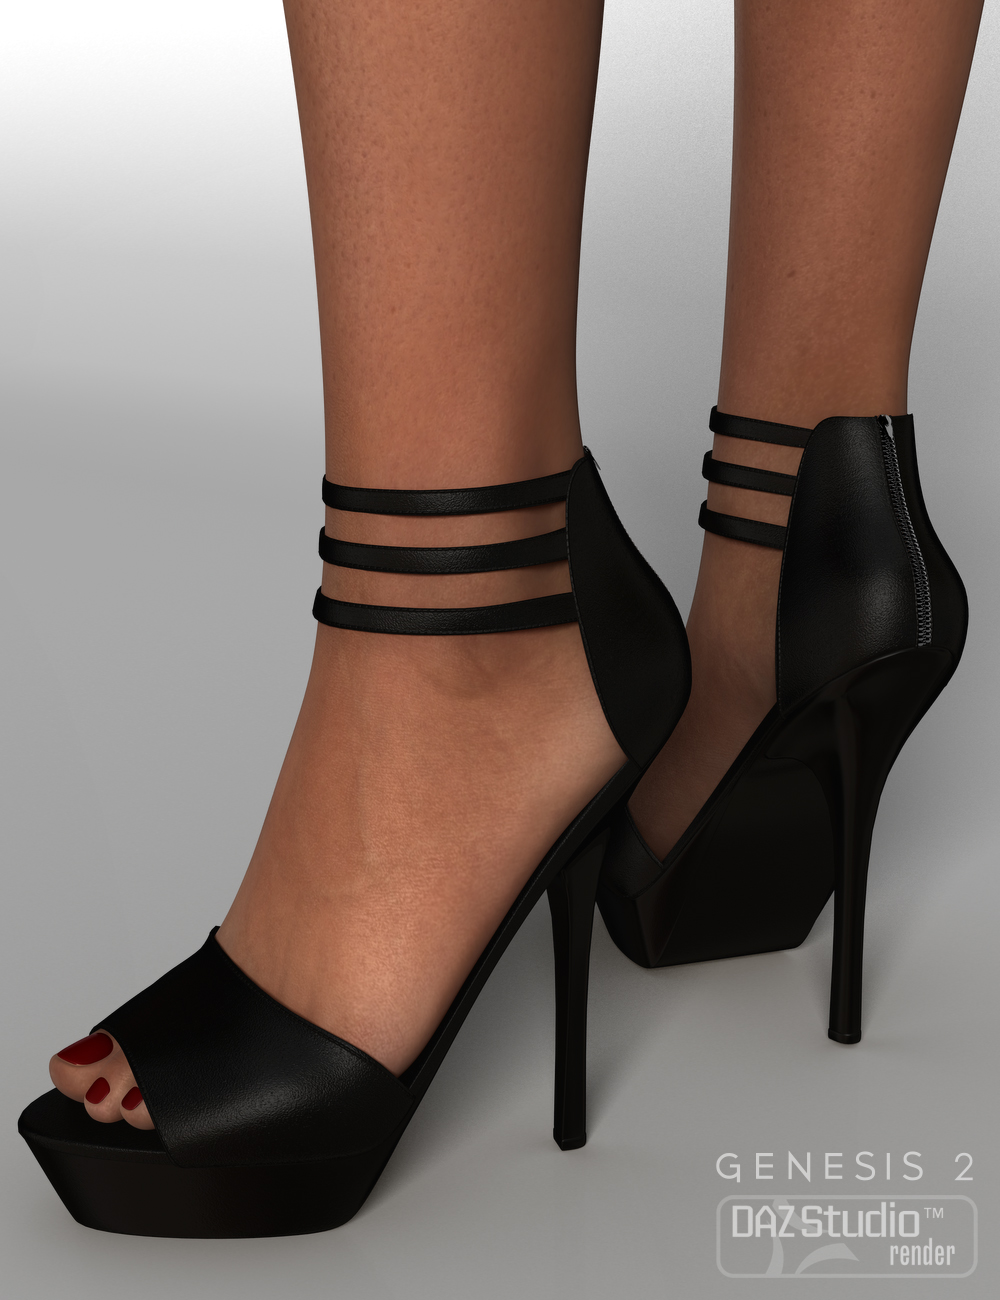 Lany Shoes for Genesis 2 Female(s) by: Nikisatez, 3D Models by Daz 3D